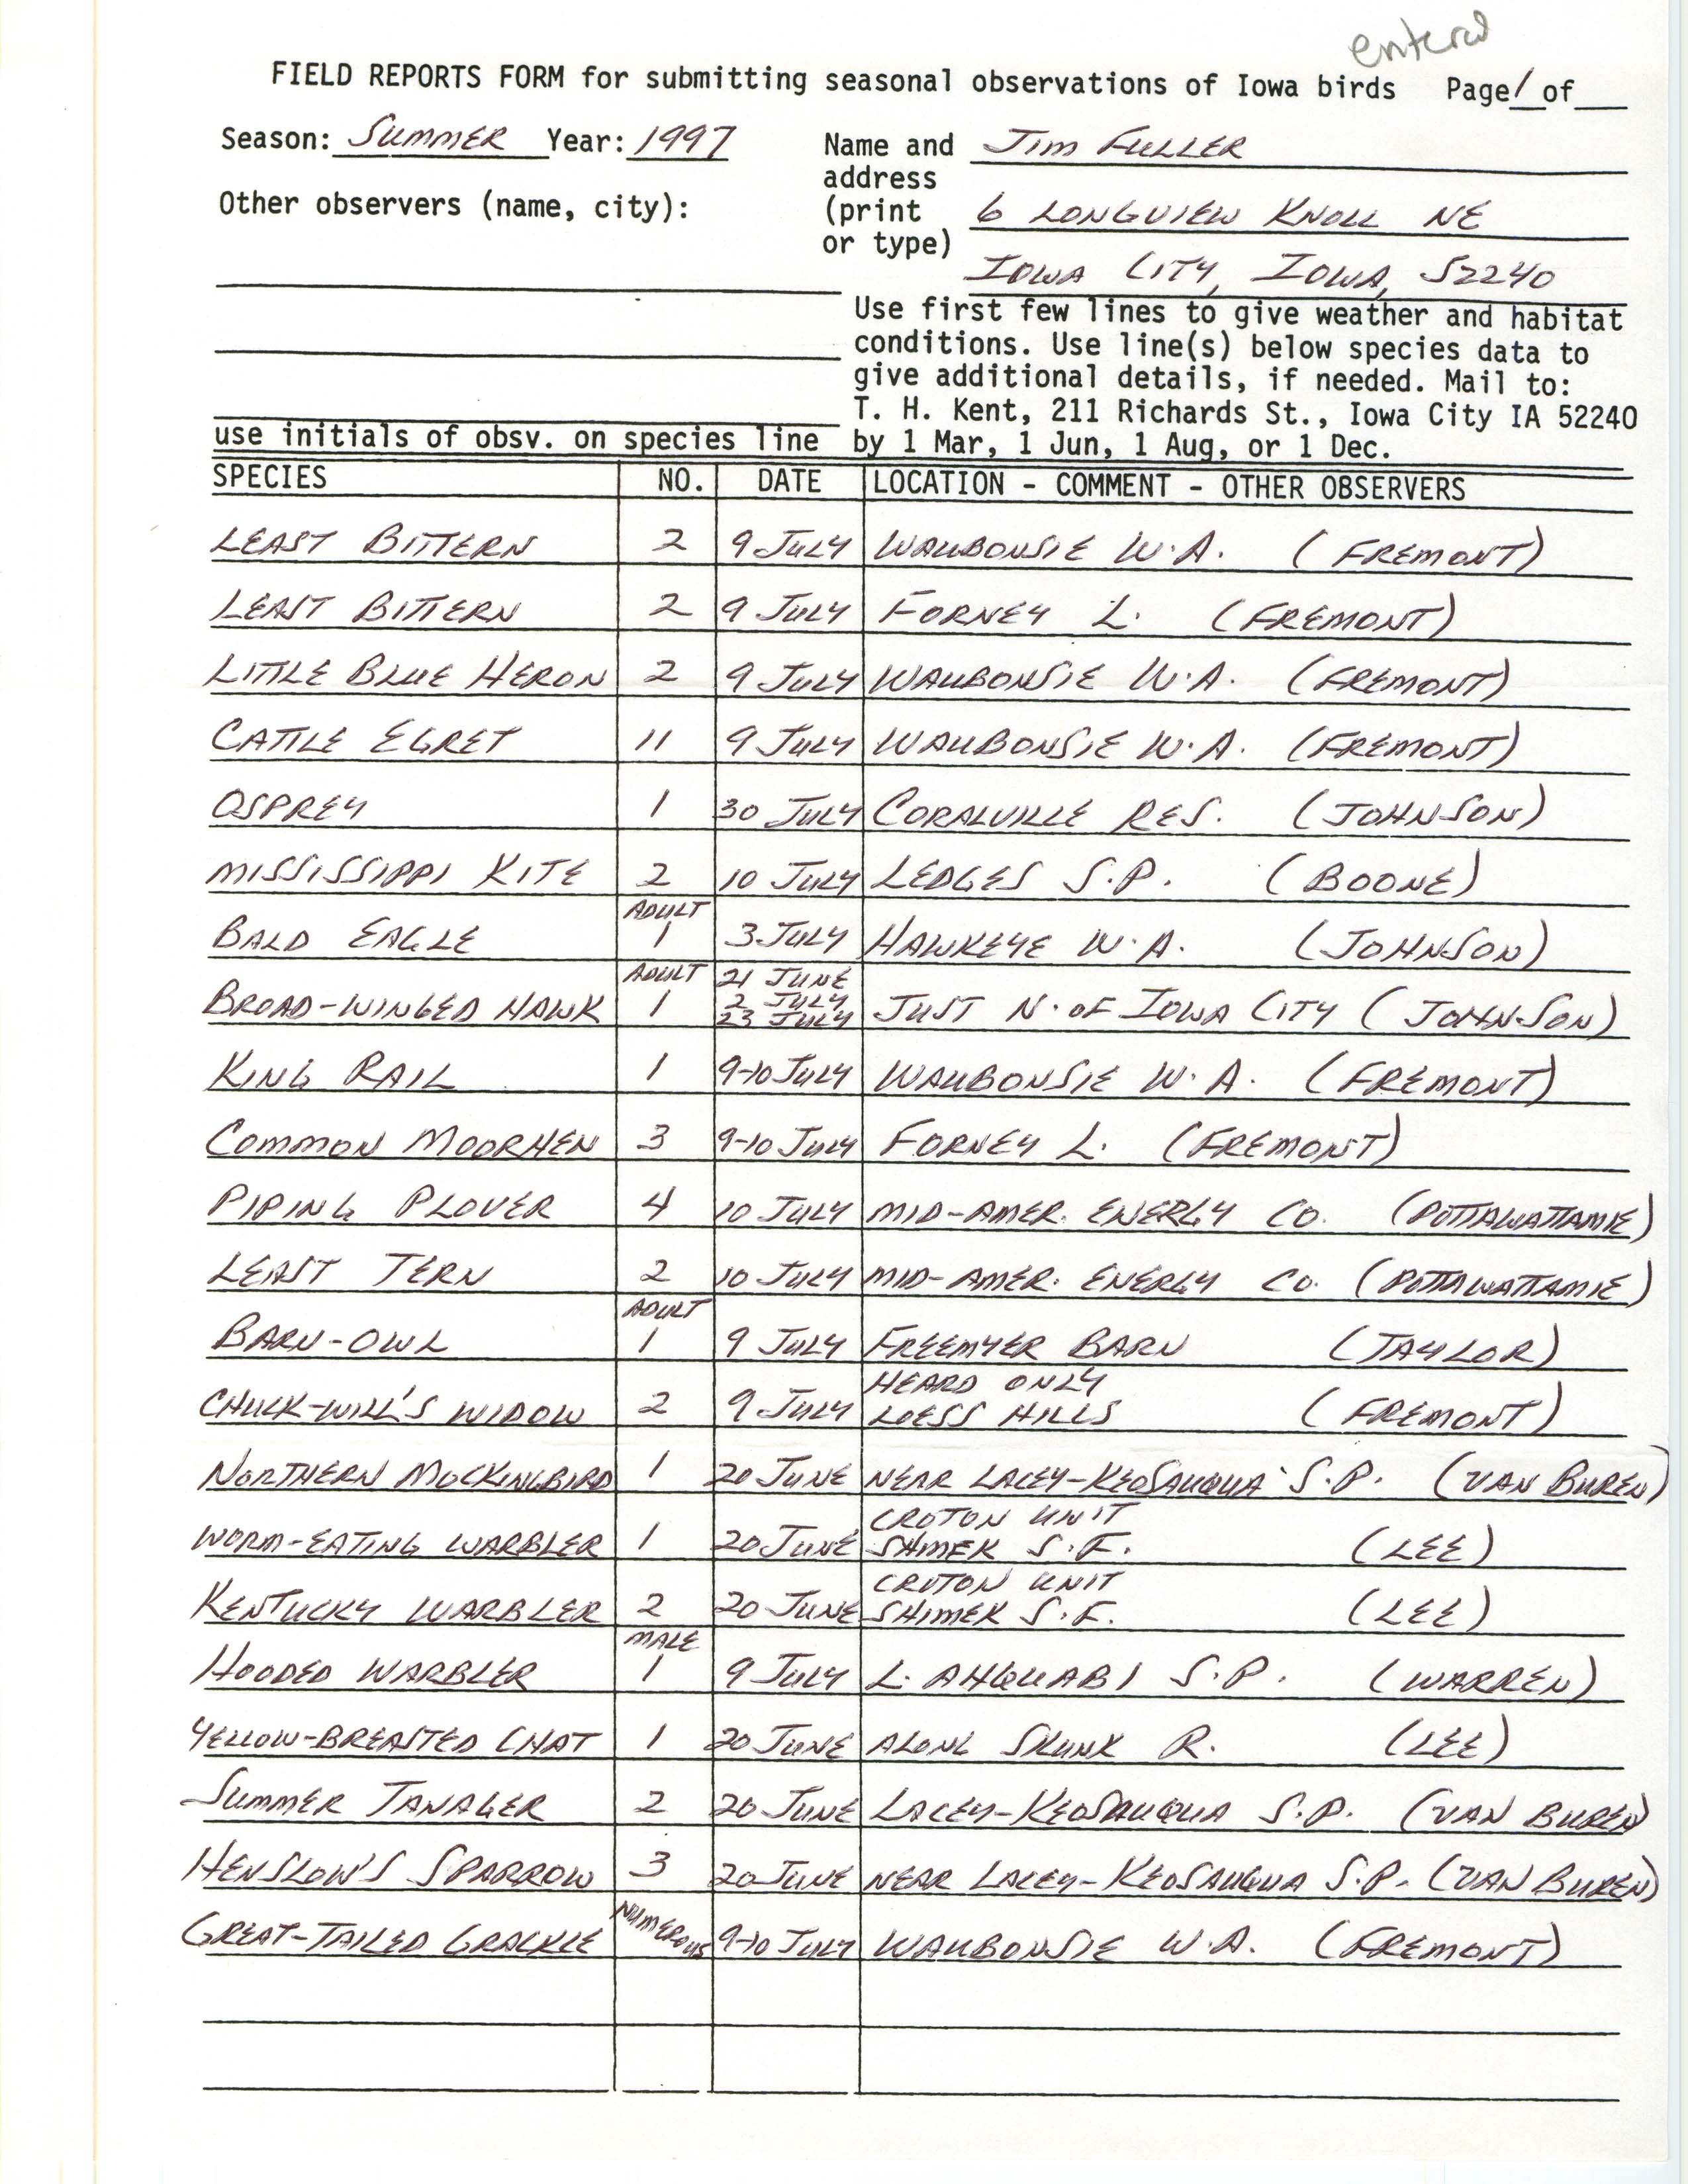 Field reports form for submitting seasonal observations of Iowa birds, James L. Fuller, summer 1997